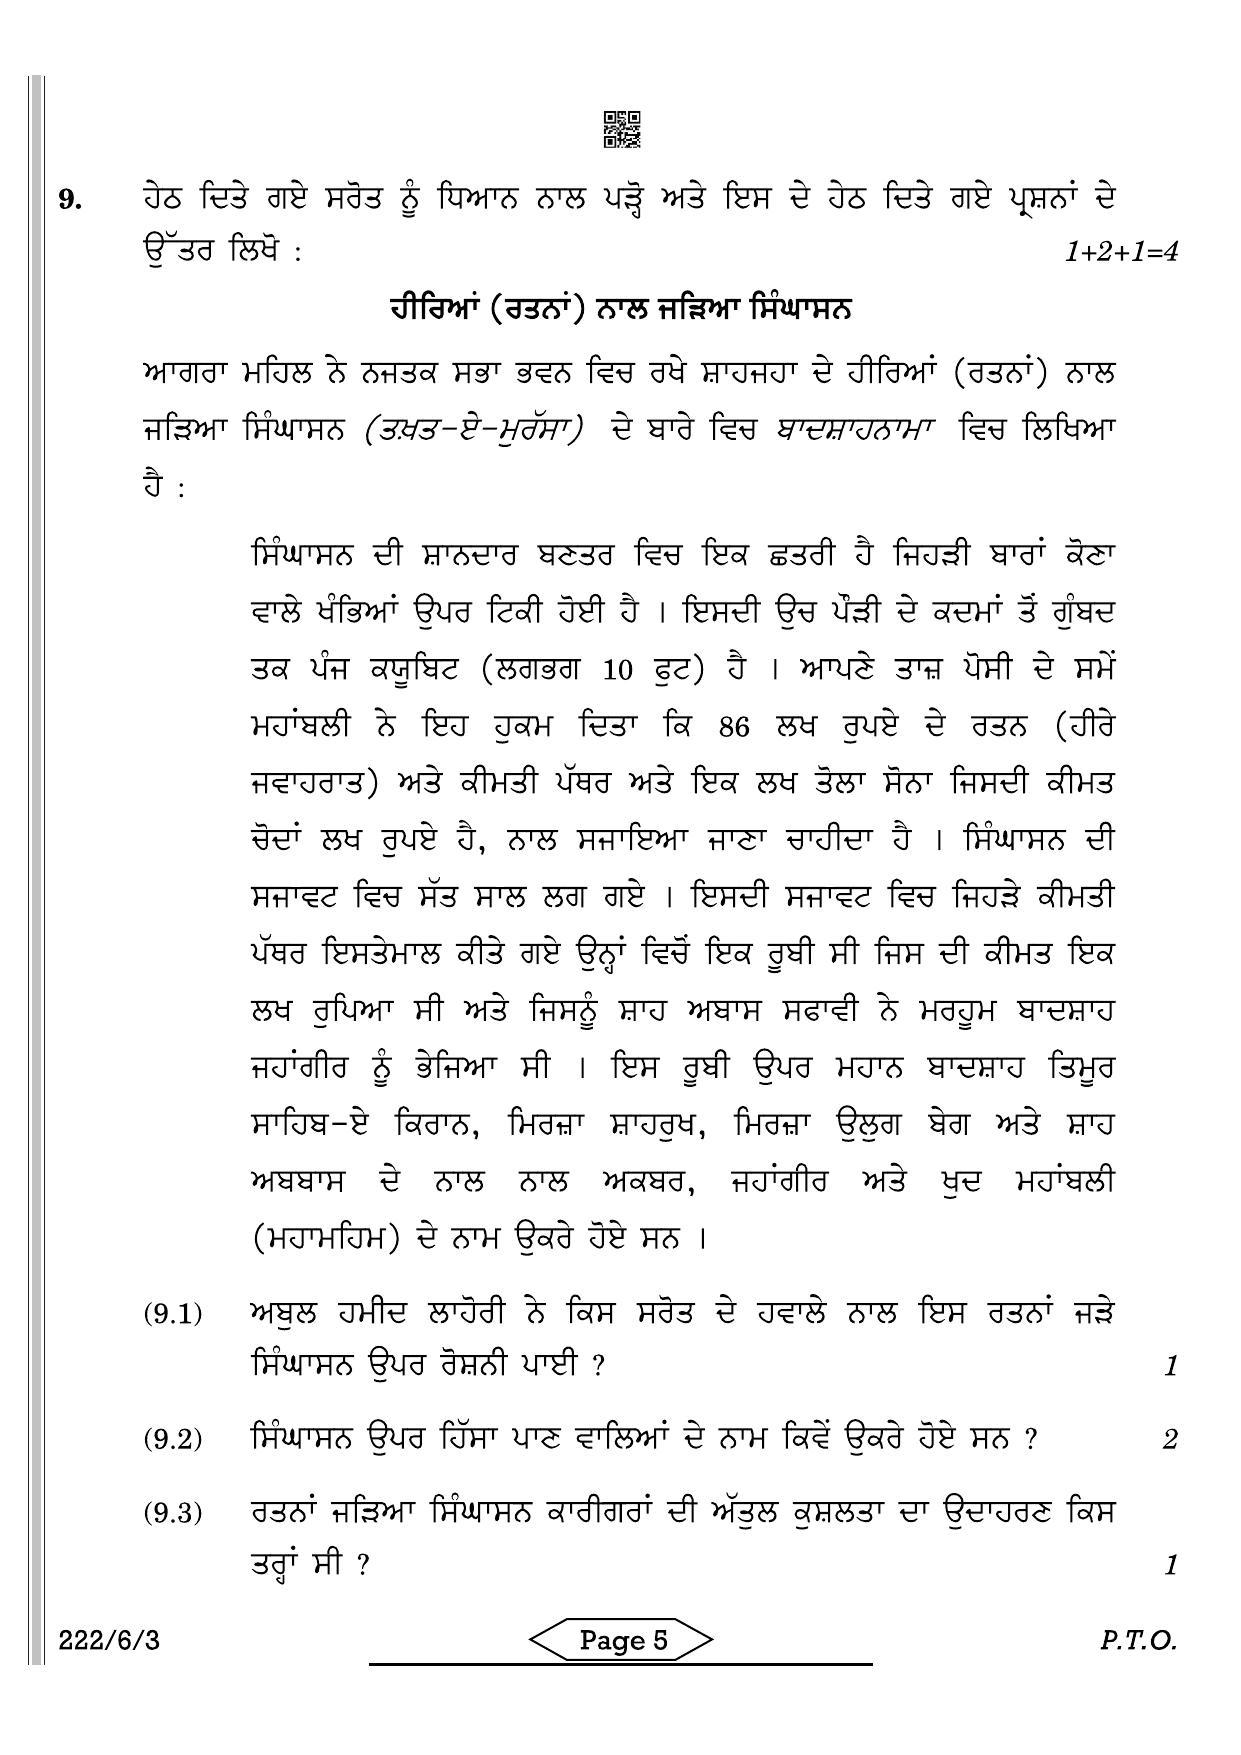 CBSE Class 12 222-6-3 History Punjabi 2022 Compartment Question Paper - Page 5